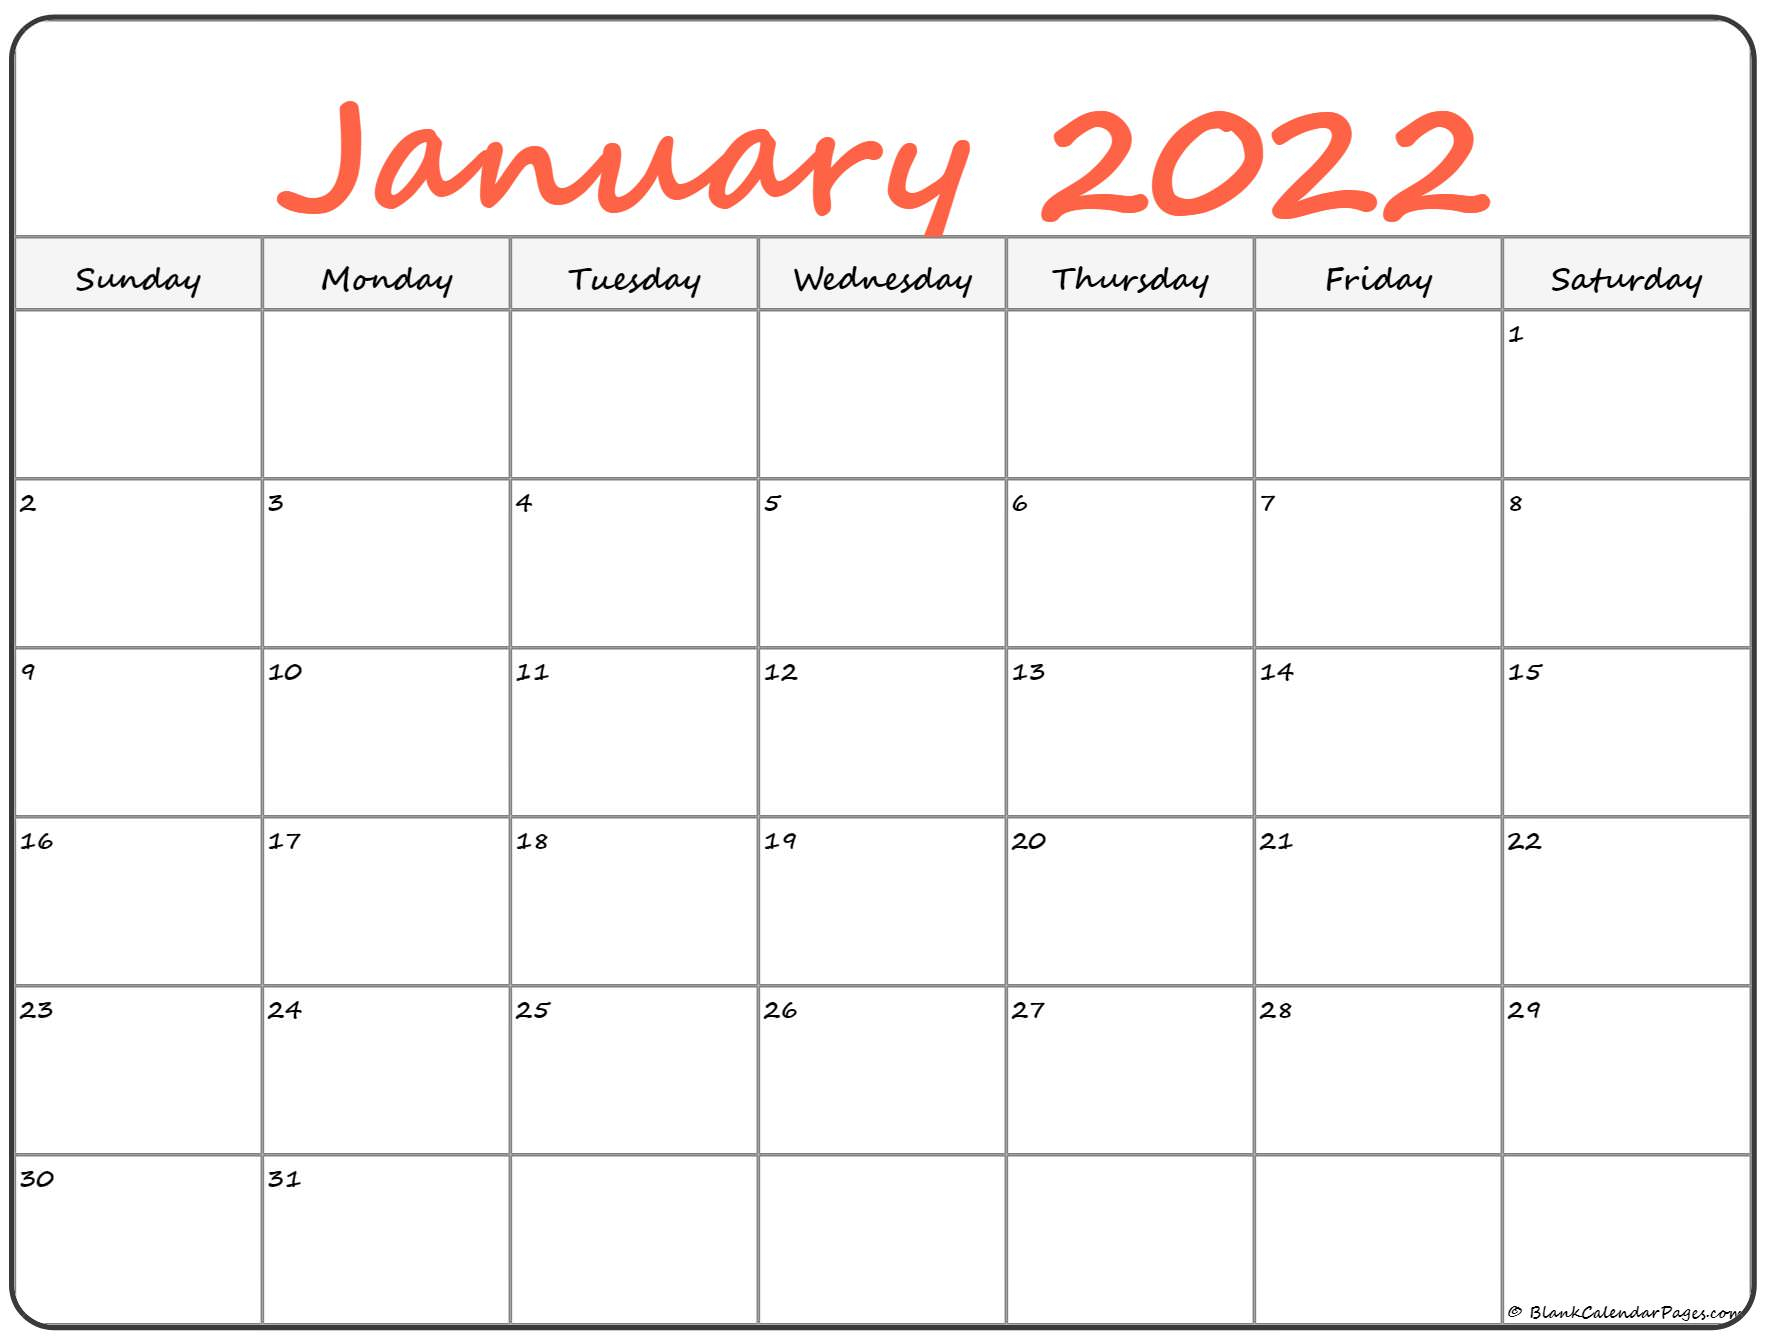 Pick How Many Days Does February 2022 Have